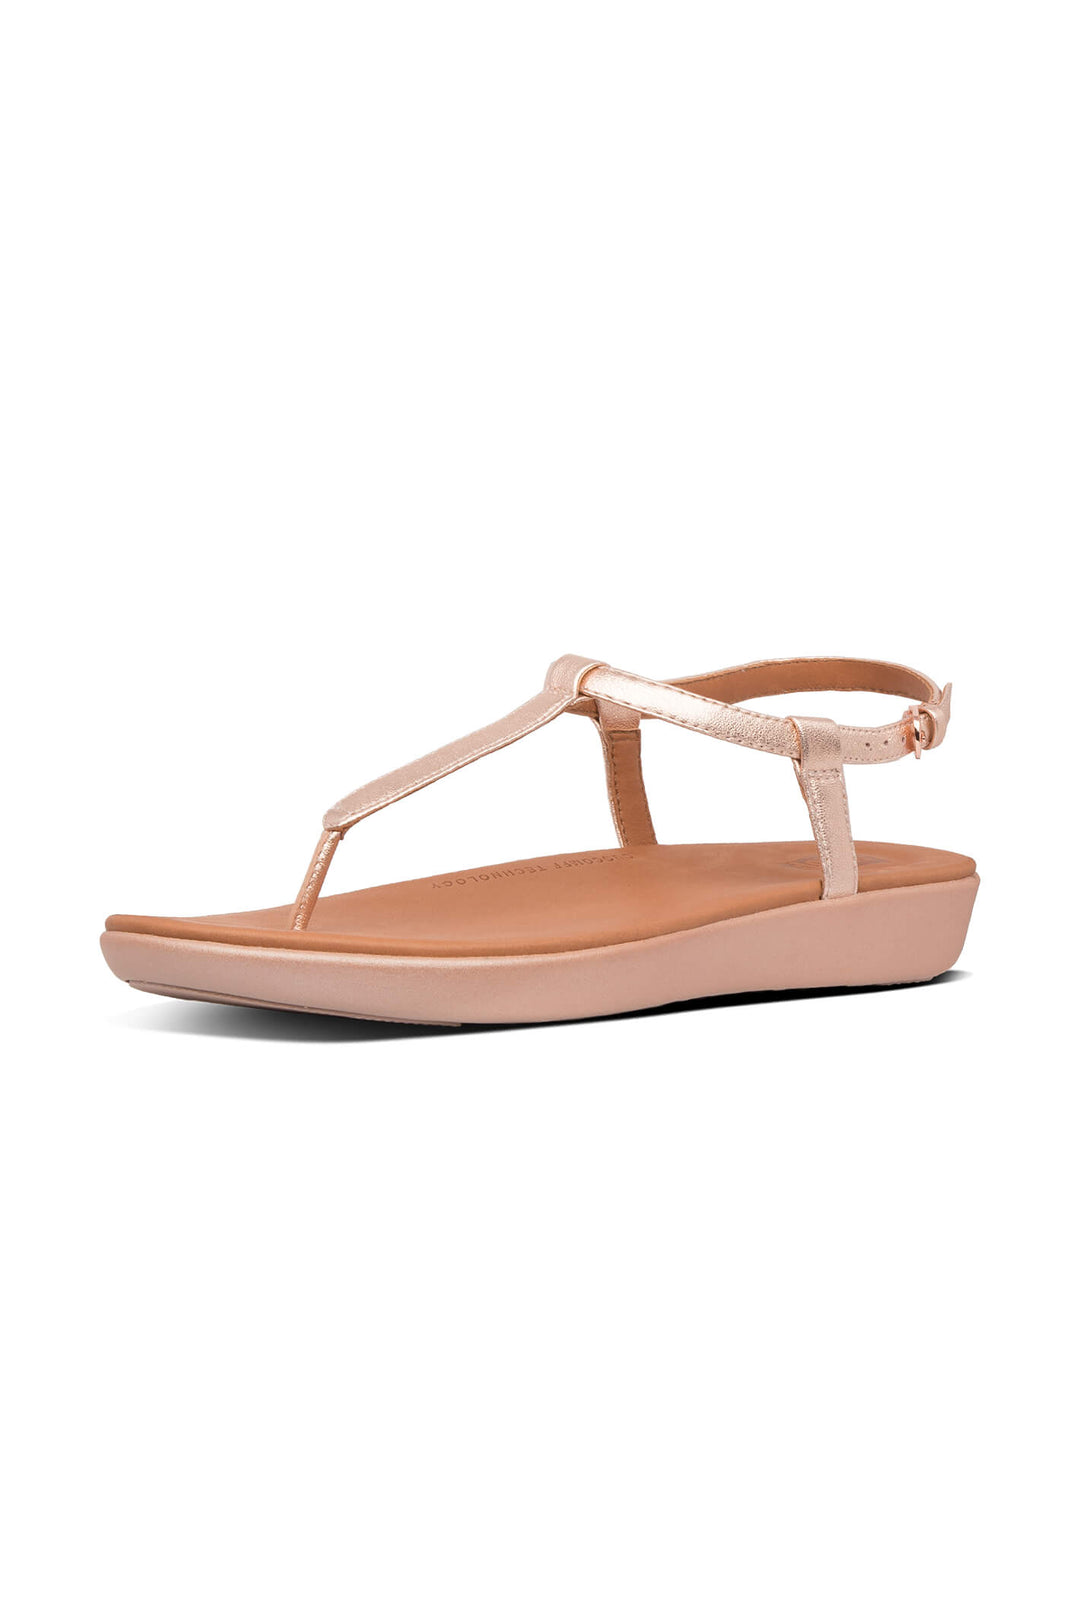 Fitflop Tia L36 Toe-thong Leather Sandal&nbsp;Rose Gold 323 - Shirley Allum#colour_rose-gold-323